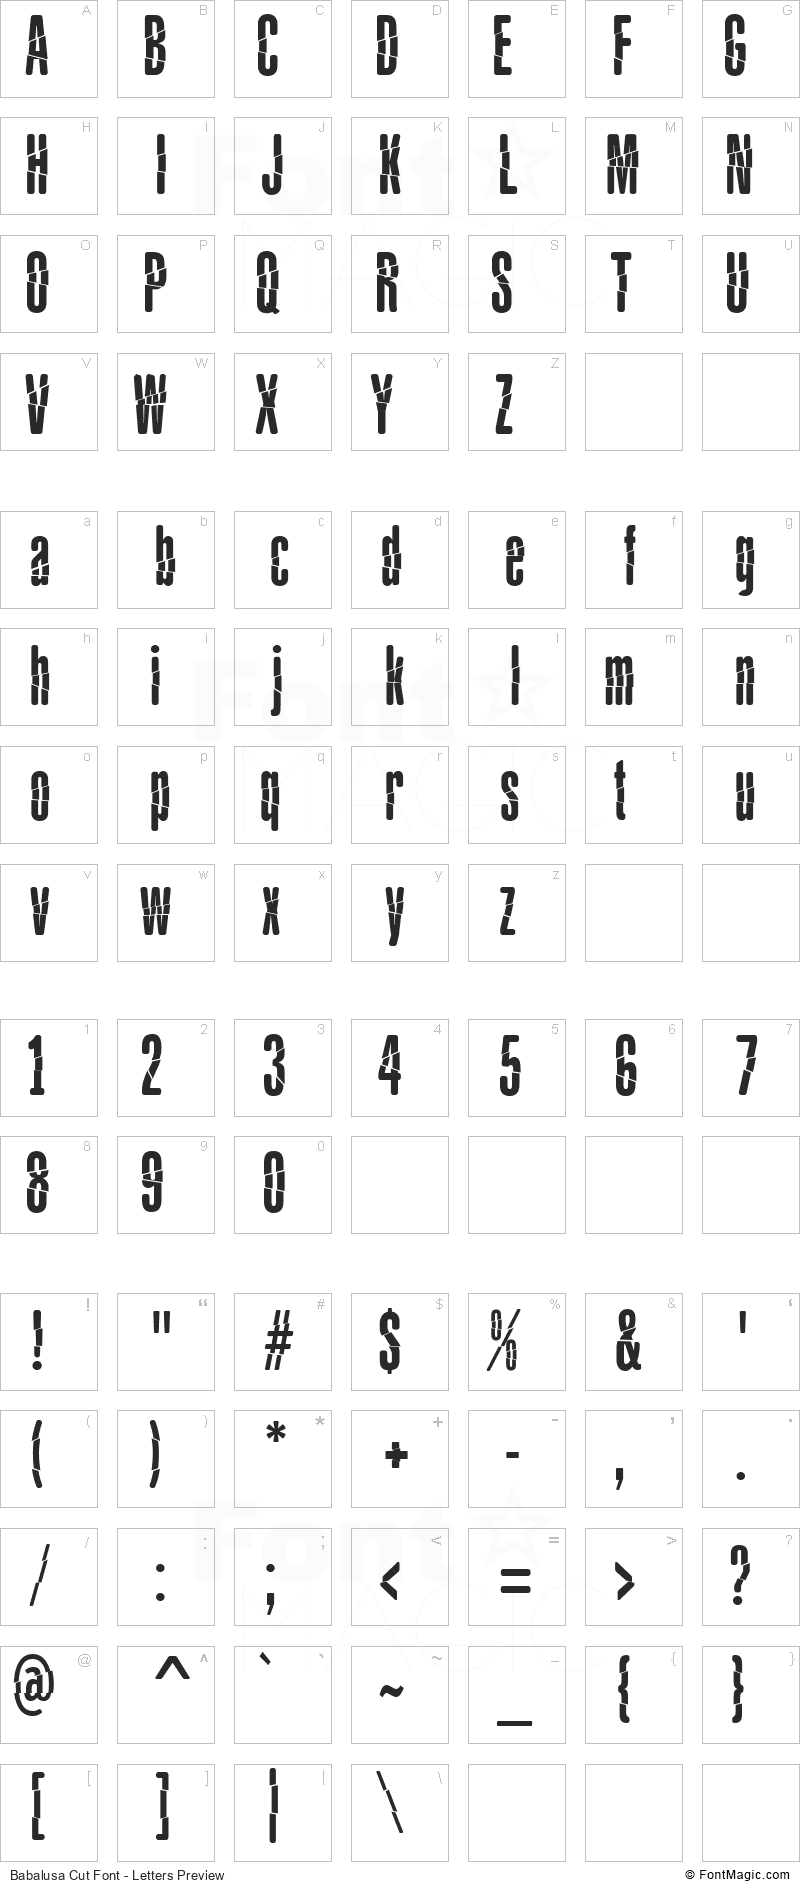 Babalusa Cut Font - All Latters Preview Chart